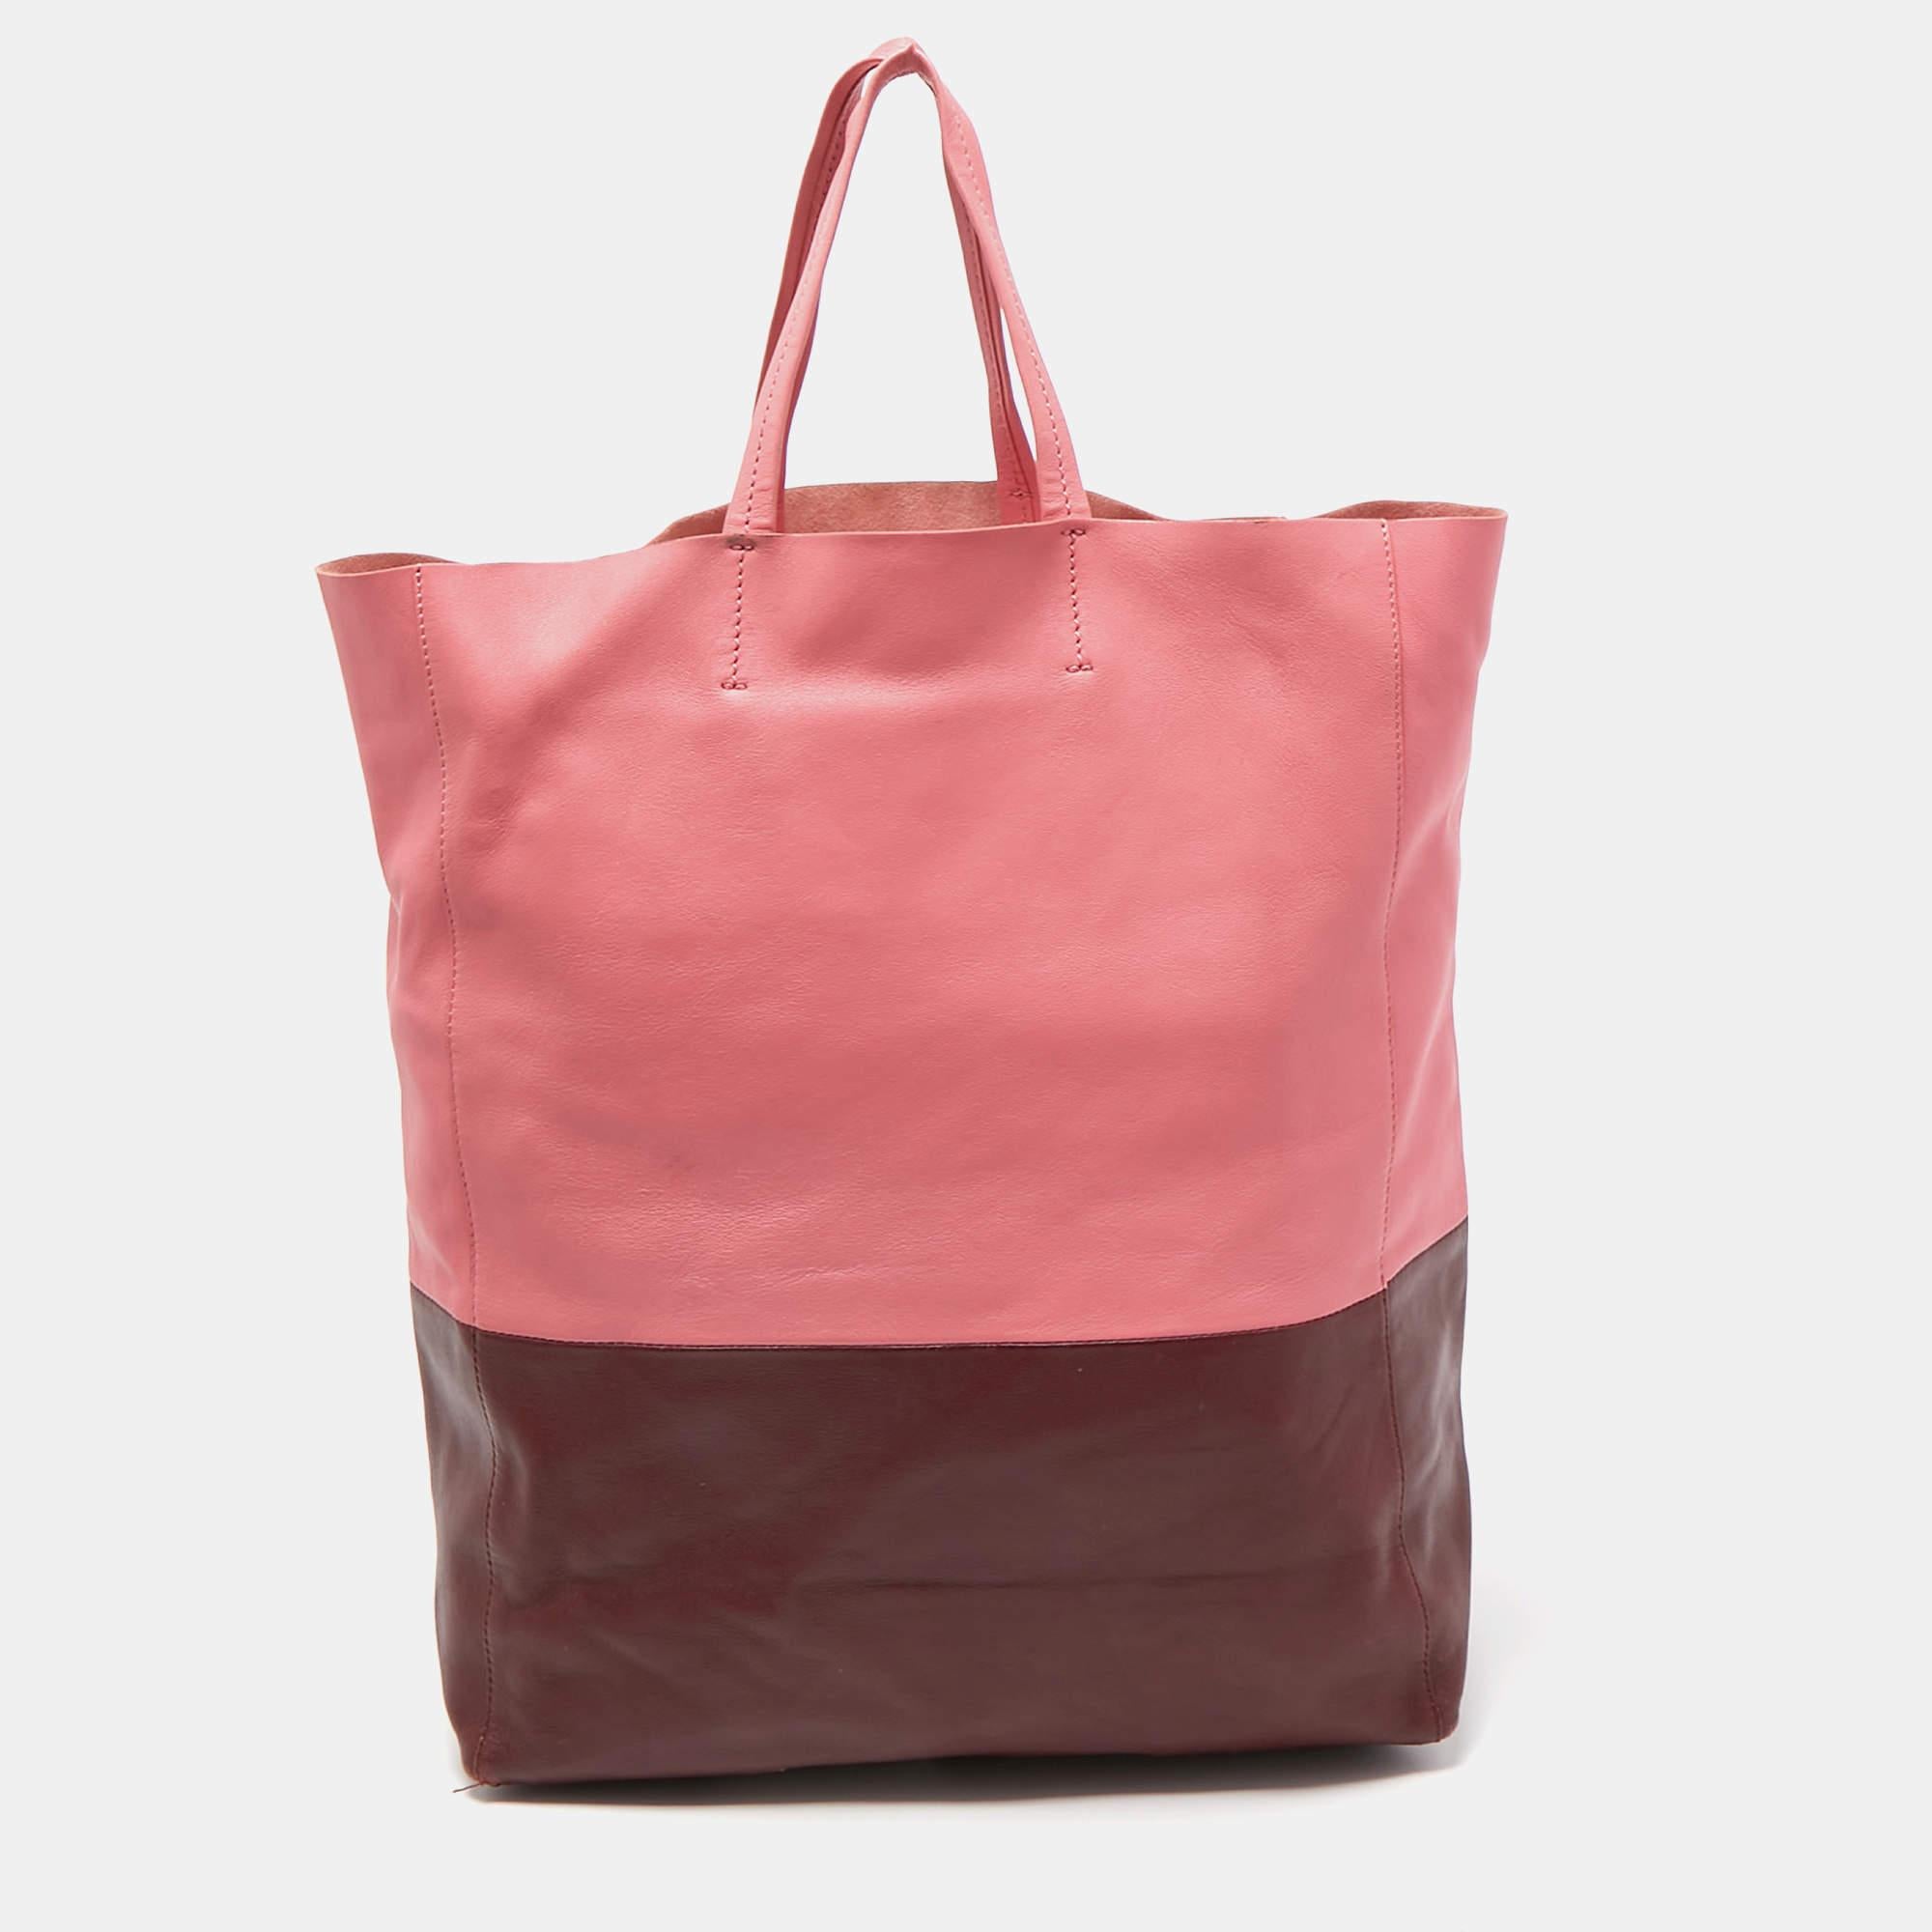 This alluring tote bag for women has been designed to assist you on any day. Convenient to carry and fashionably designed, the tote is cut with skill and sewn into a great shape. It is well-equipped to be a reliable accessory.



